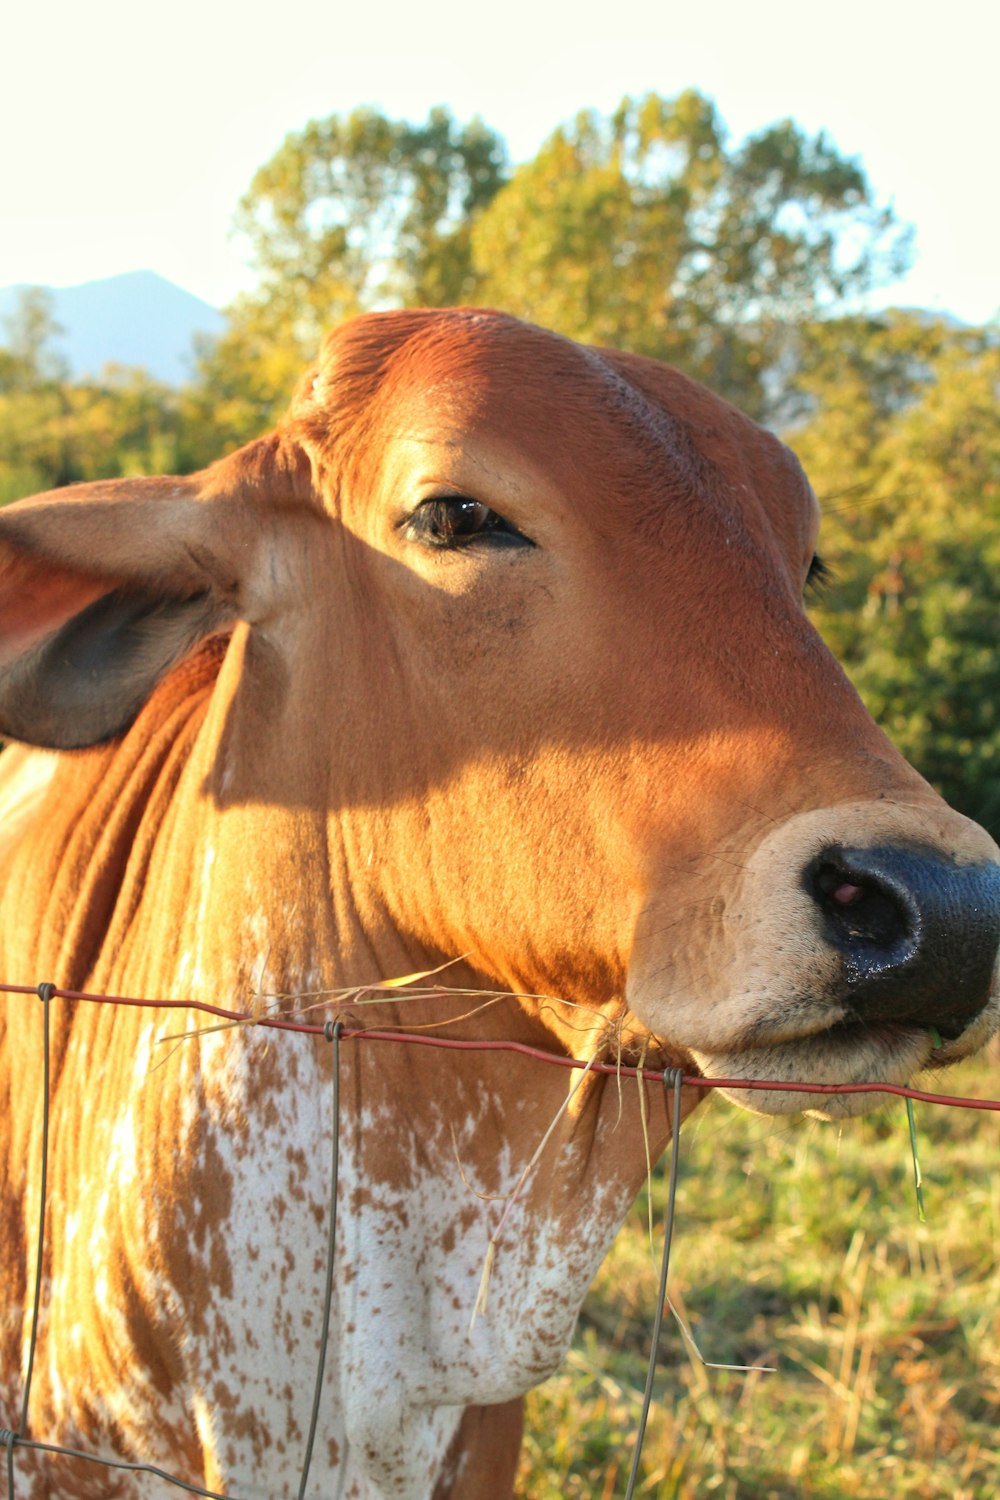 a brown and white cow standing next to a wire fence